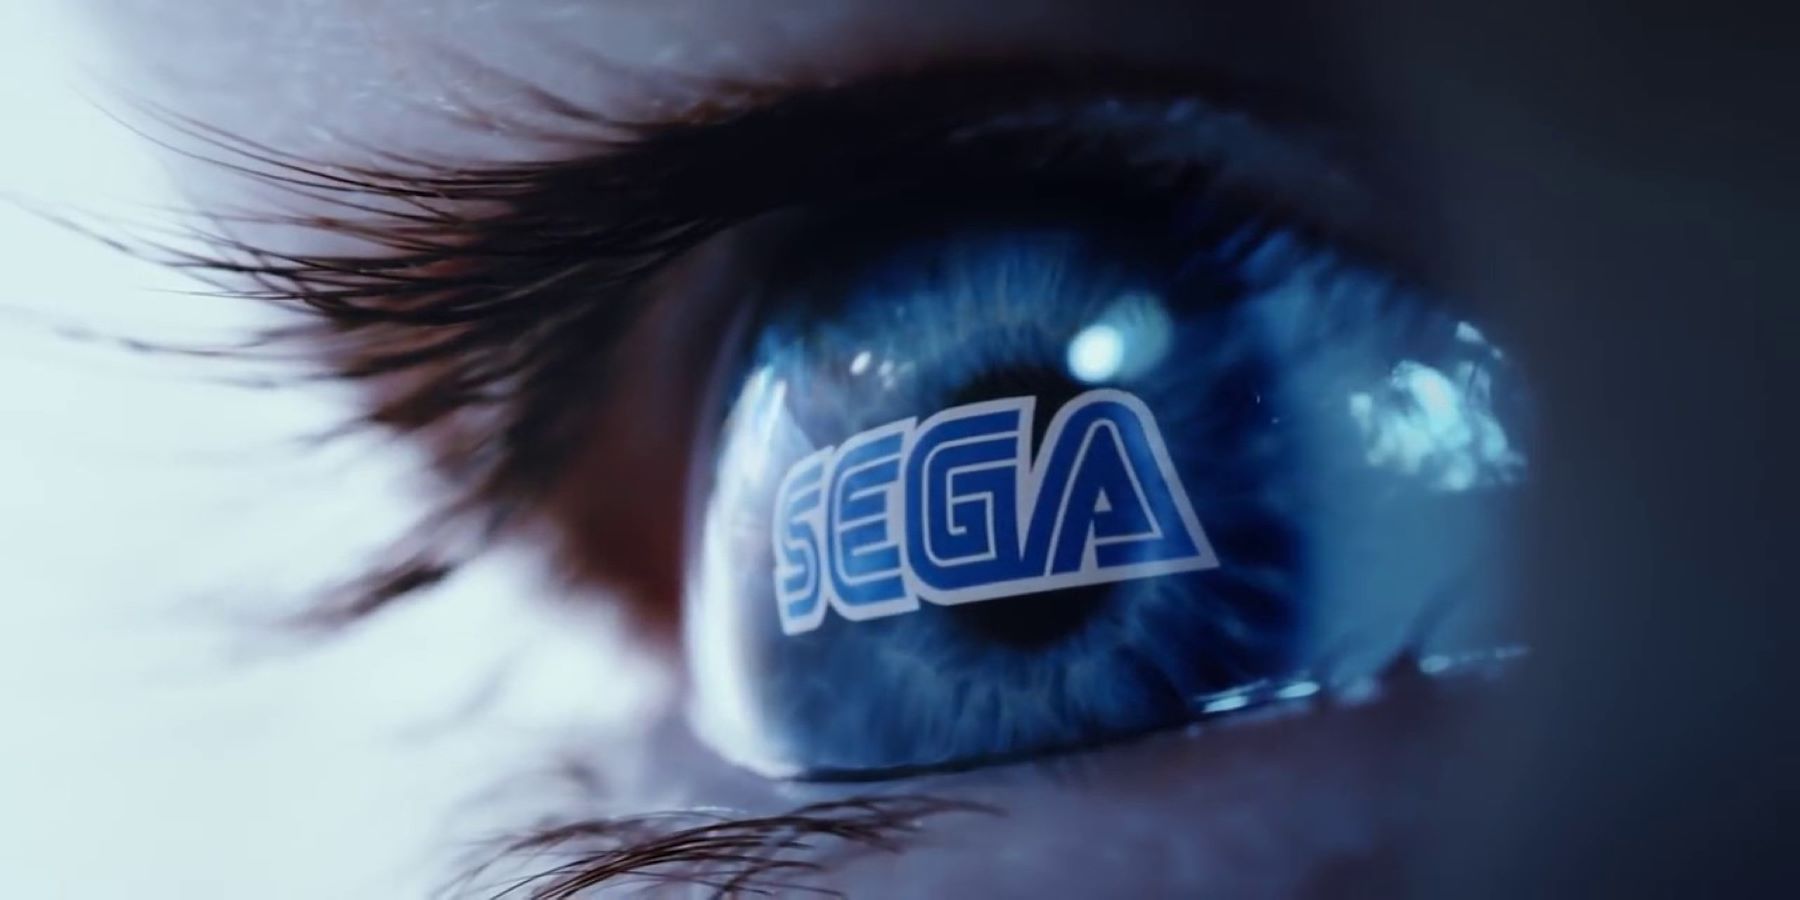 The Sega logo appearing on a person's eye